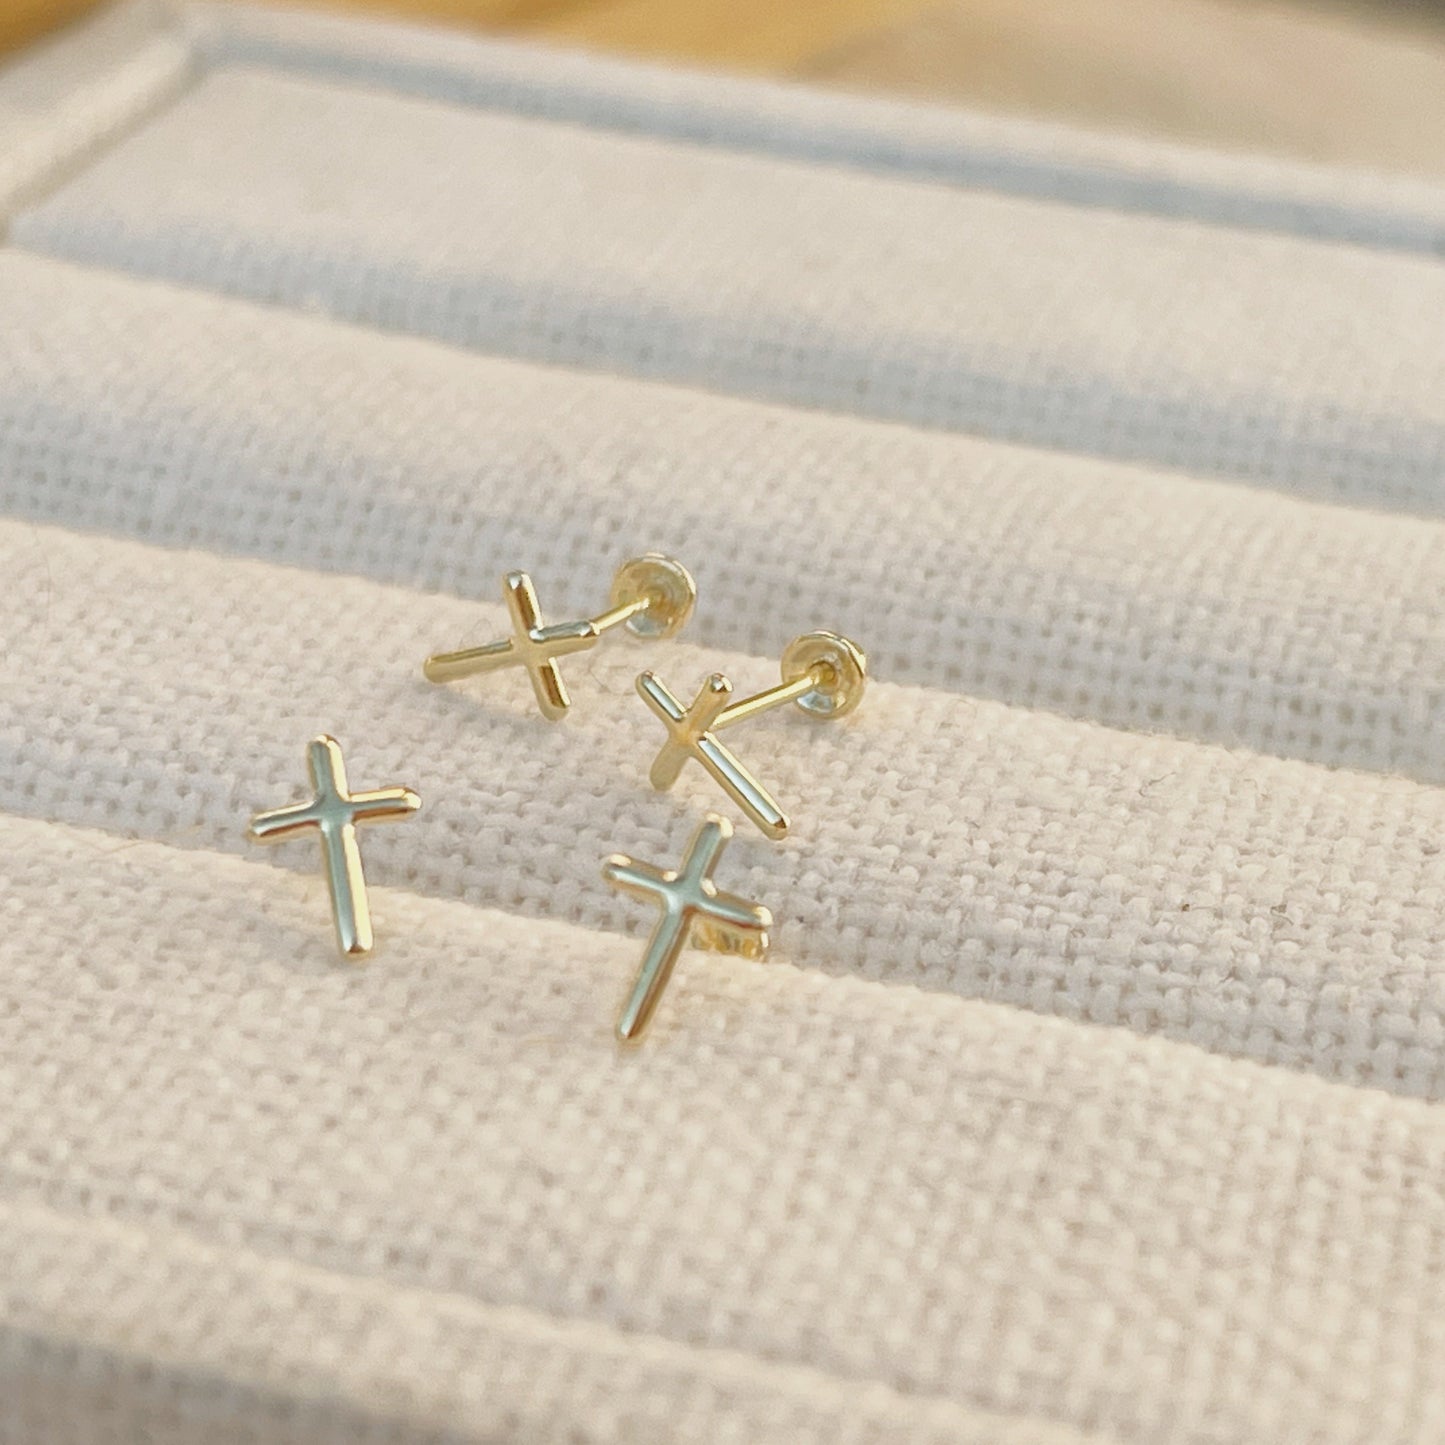 These small, but bold earrings are a great way to express your faith. The solid 10k gold cross studs are optimized for comfort and durability. The simple design is perfect for anyone who likes to keep it simple or those new to wearing religious jewelry.